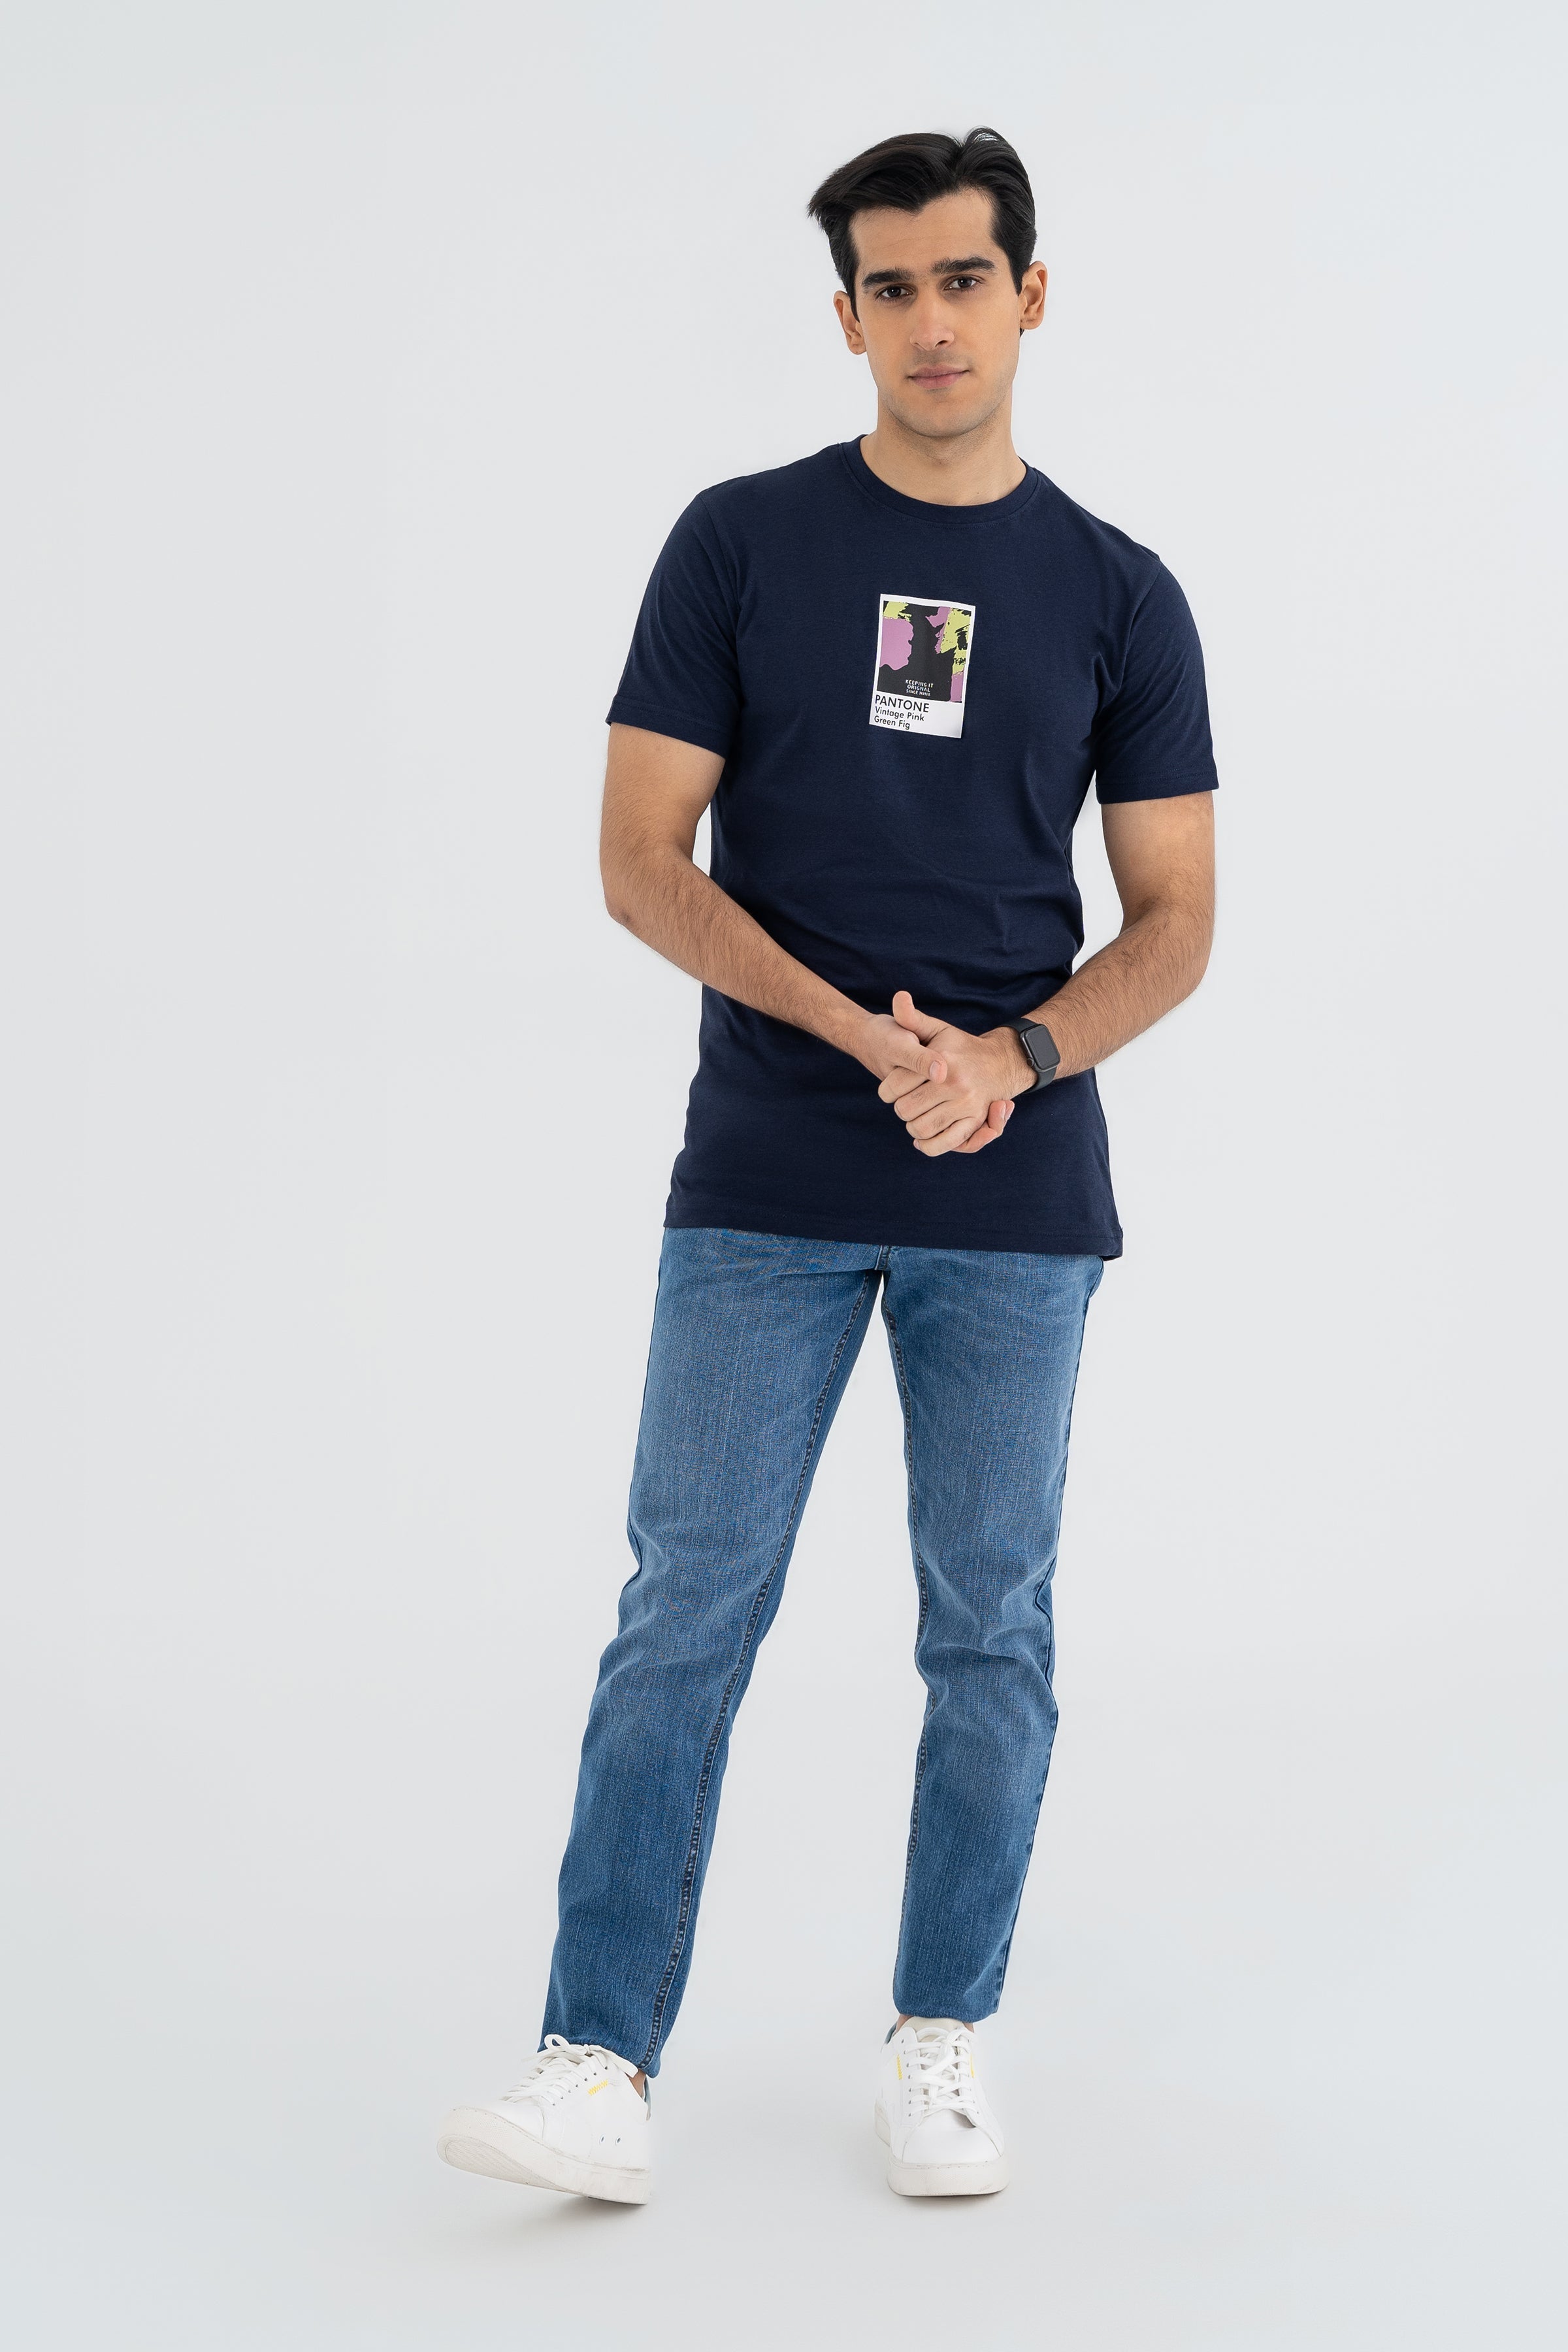 Your Go-To Navy Tee